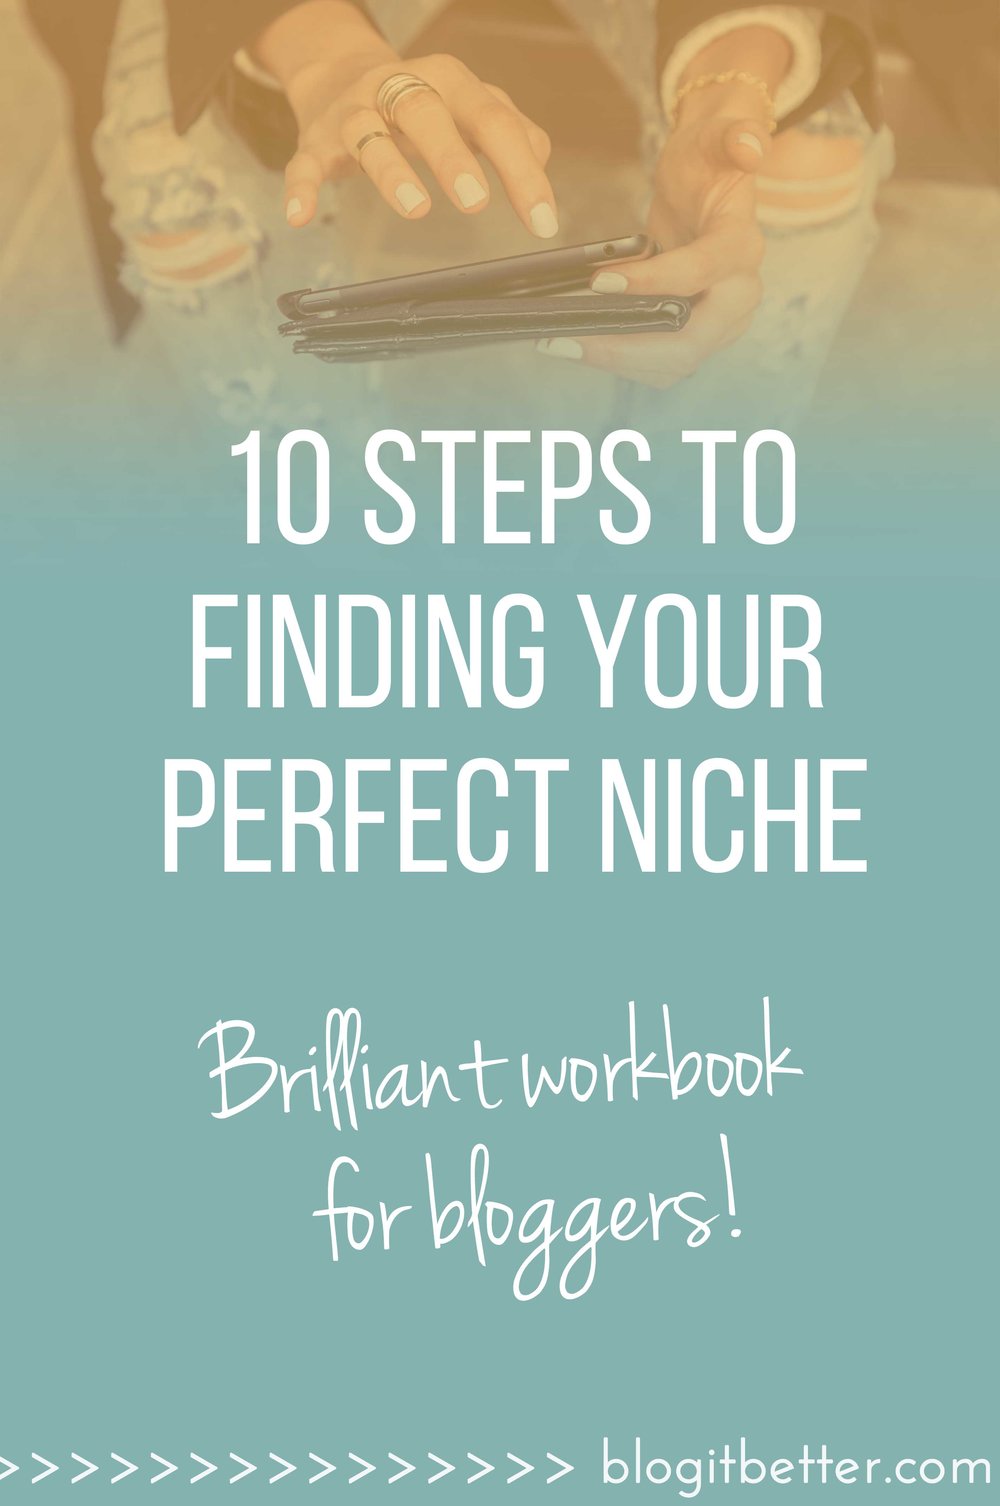 Become a better blogger! This super useful and handy workbook takes you through 10 simple and effective steps to identifying YOUR perfect blogging niche.